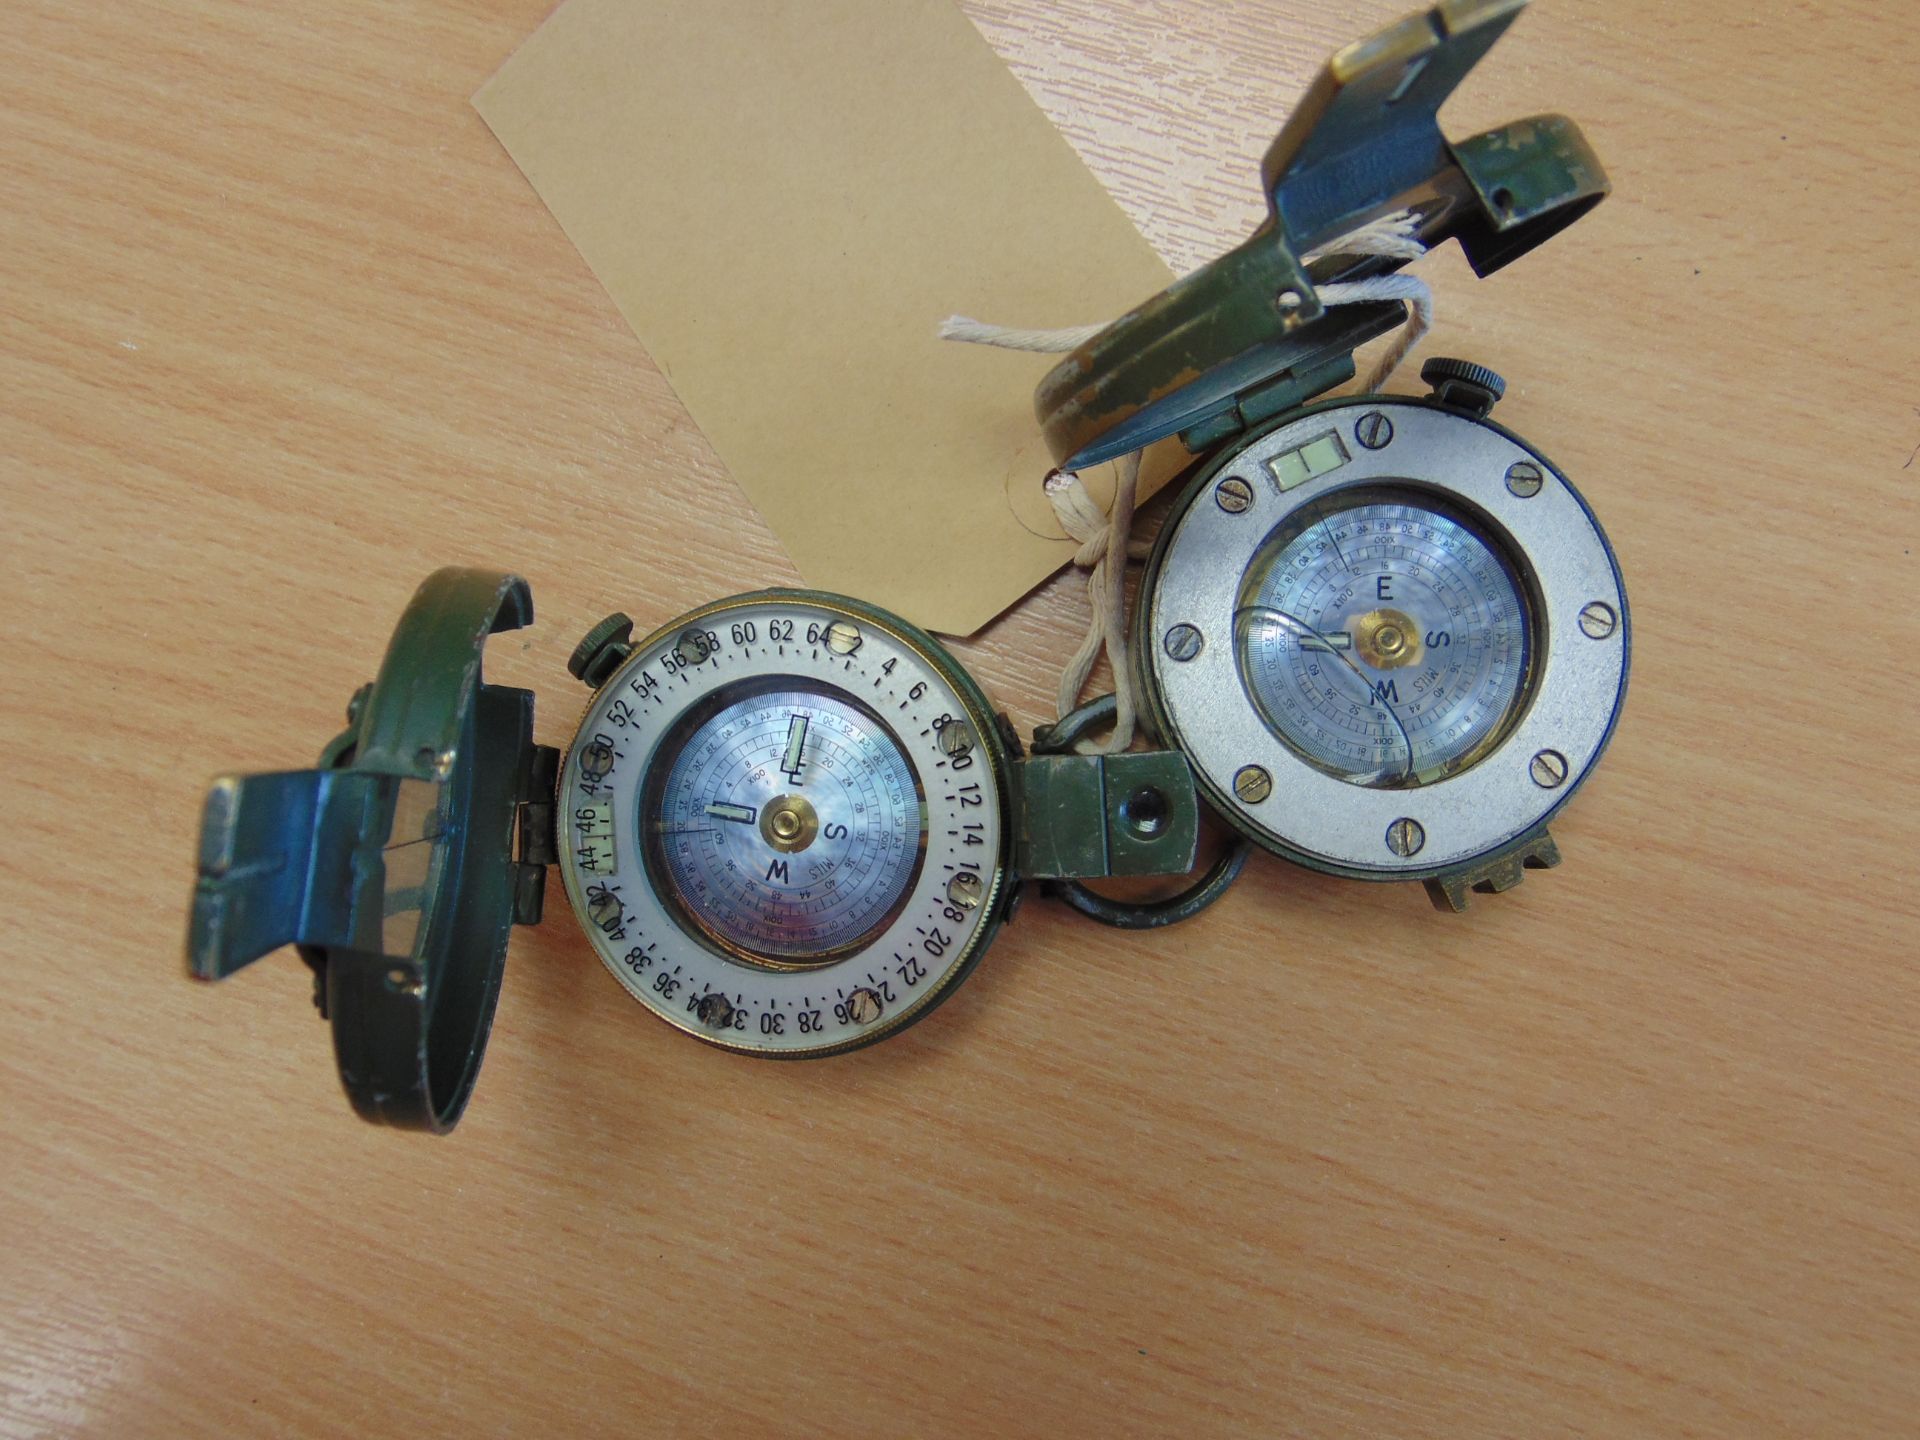 2 STANLEY LONDON PRISMATIC COMPASS BRITISH ARMY ISSUE NATO MARKS IN MILS - Image 2 of 6